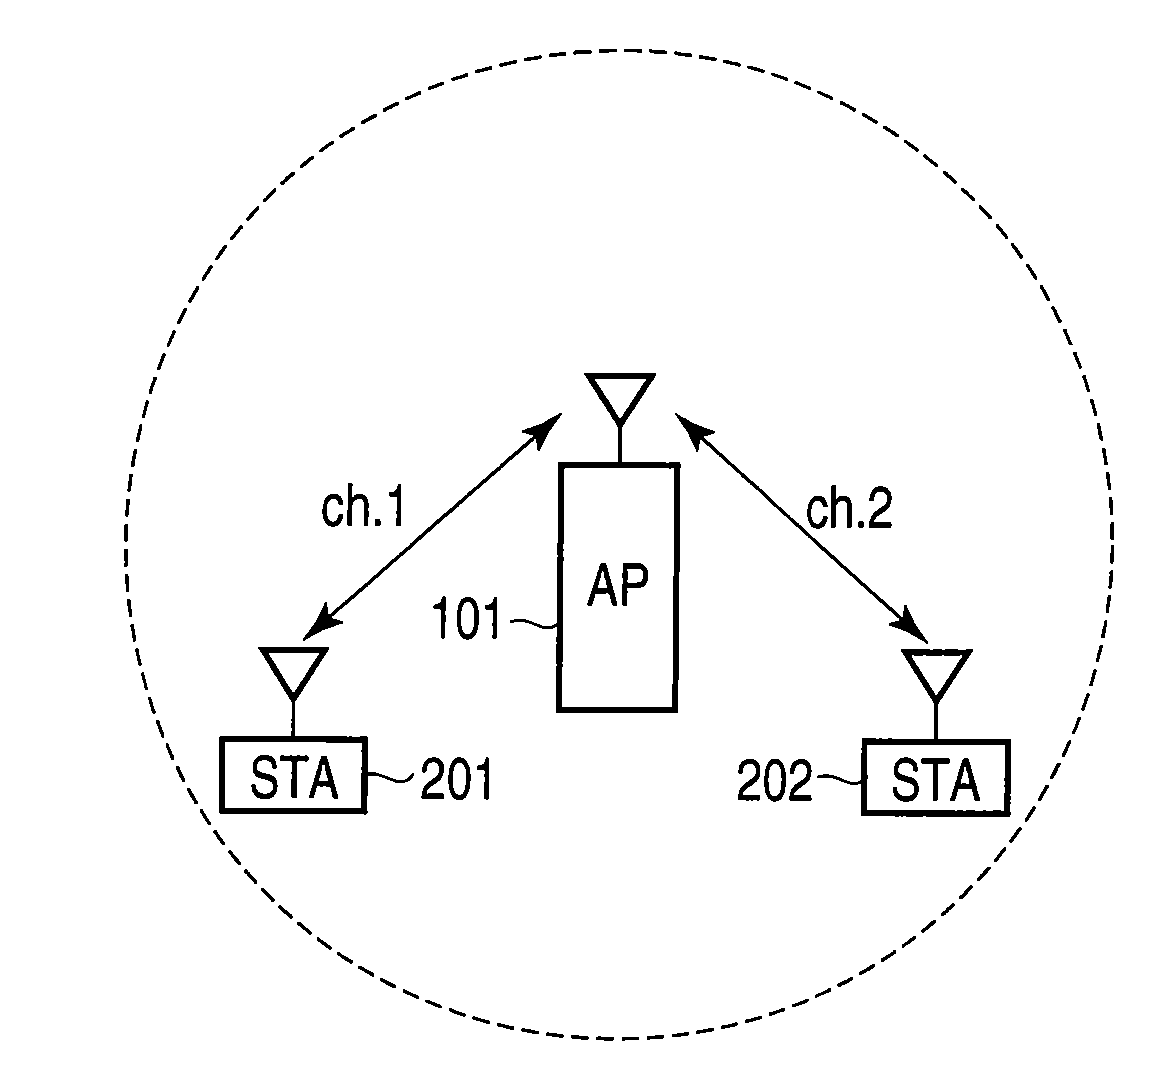 Apparatus and method for wireless communication